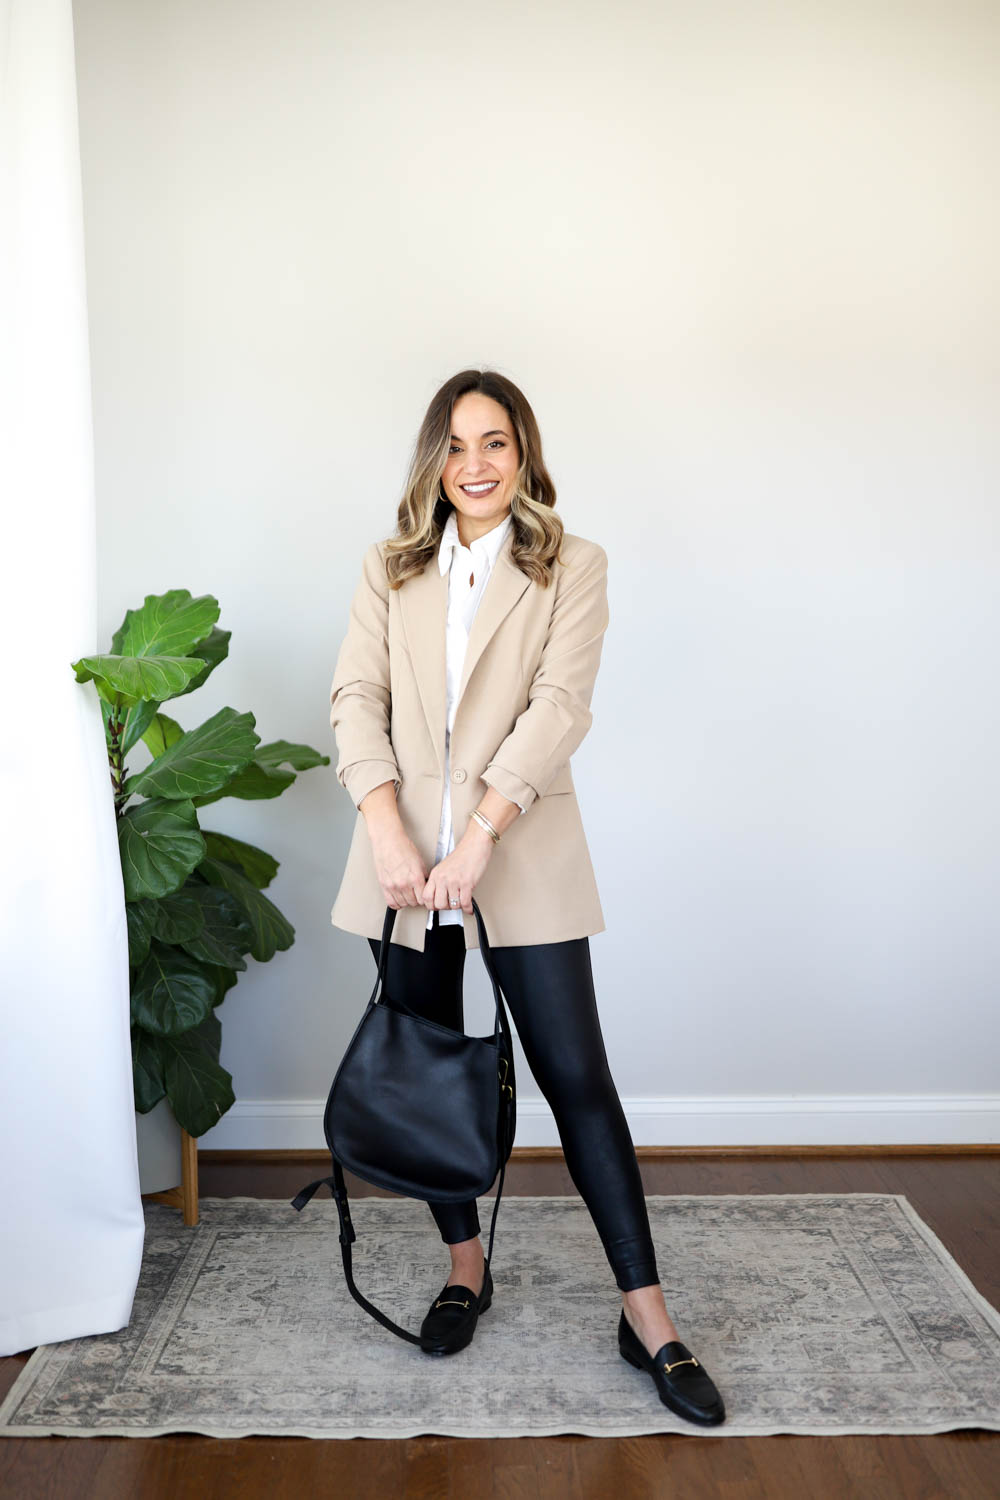 Beige Leather Pumps with Leggings Outfits In Their 30s (11 ideas & outfits)